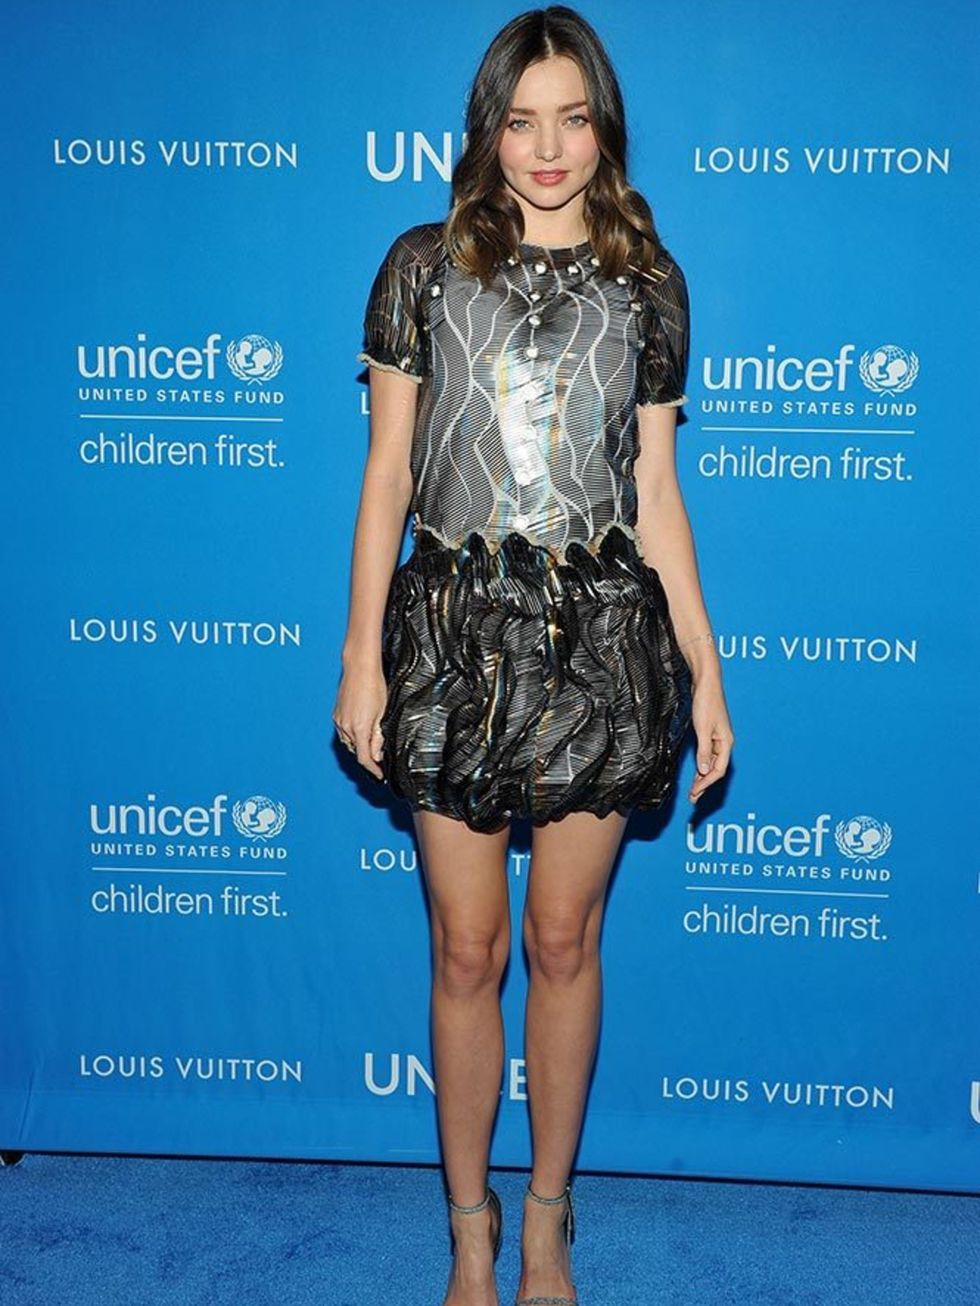 Why You'll Be Doing Good While Wearing Louis Vuitton for UNICEF's